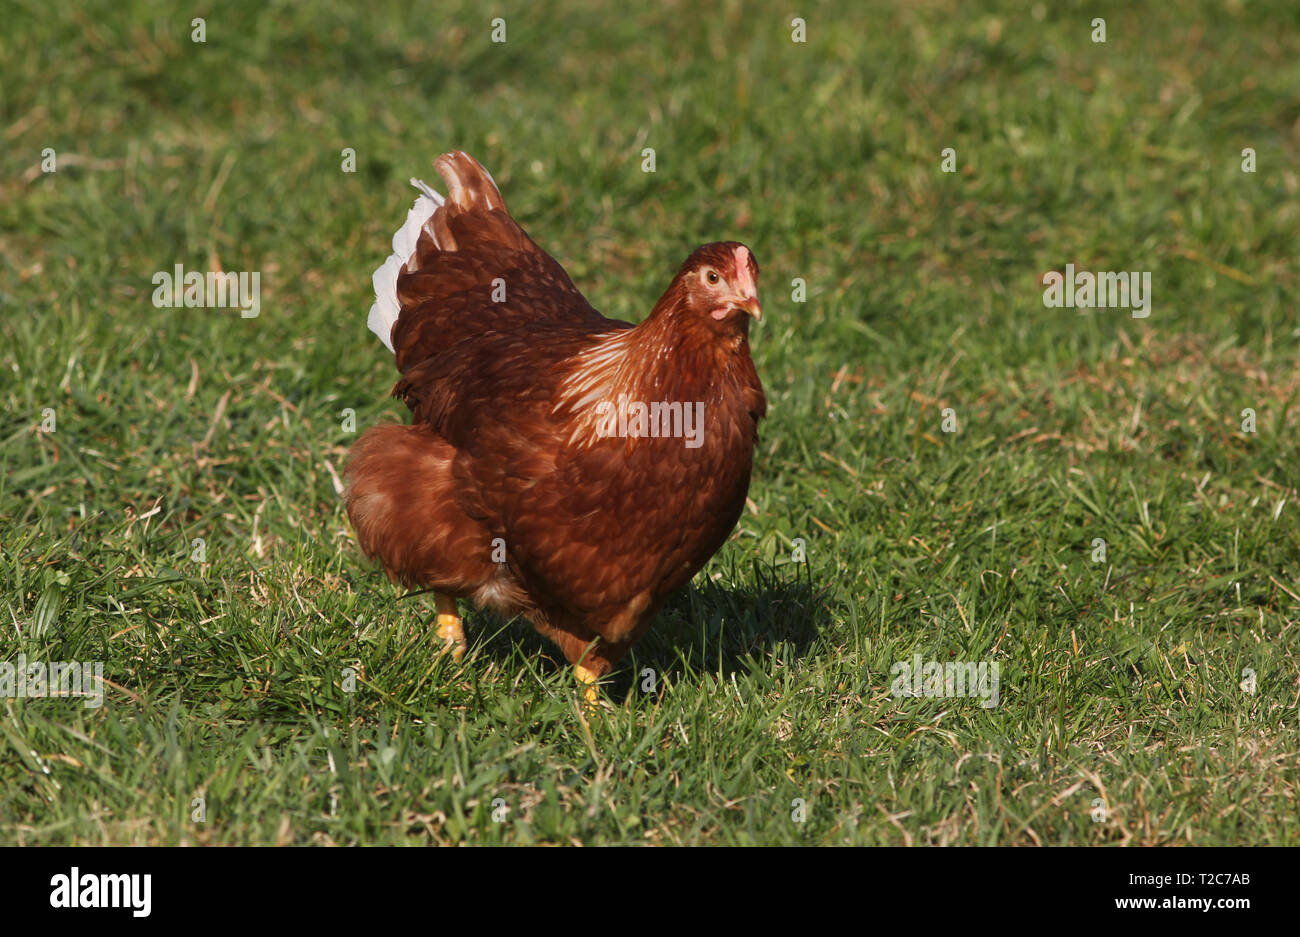 Chicken living in free-range farming, eyes directed to camera. Stock Photo